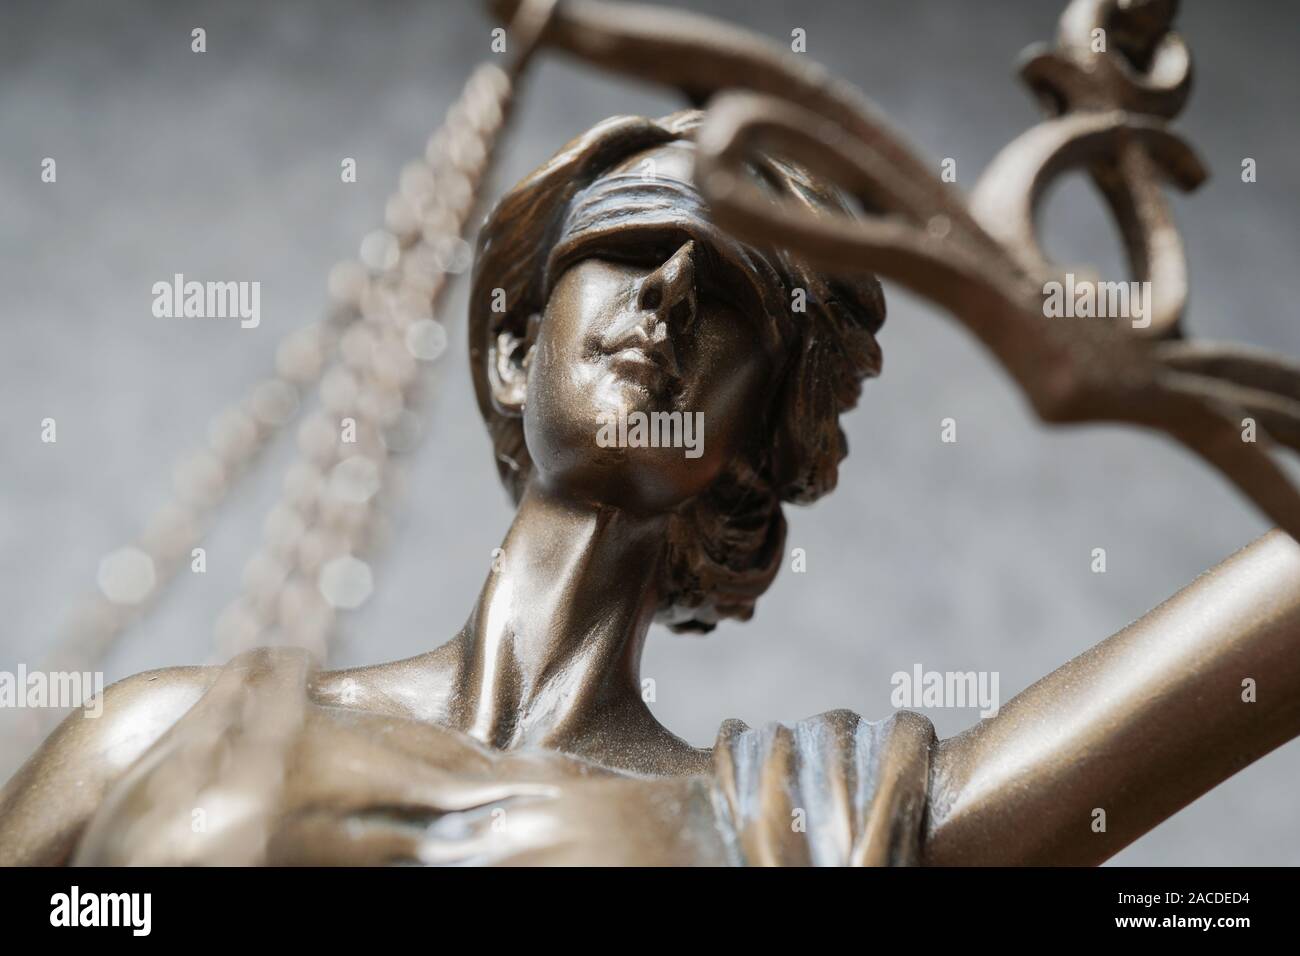 lady justice or iustitia - detail of blind or blindfolded bronze statue - law and legislation symbol Stock Photo